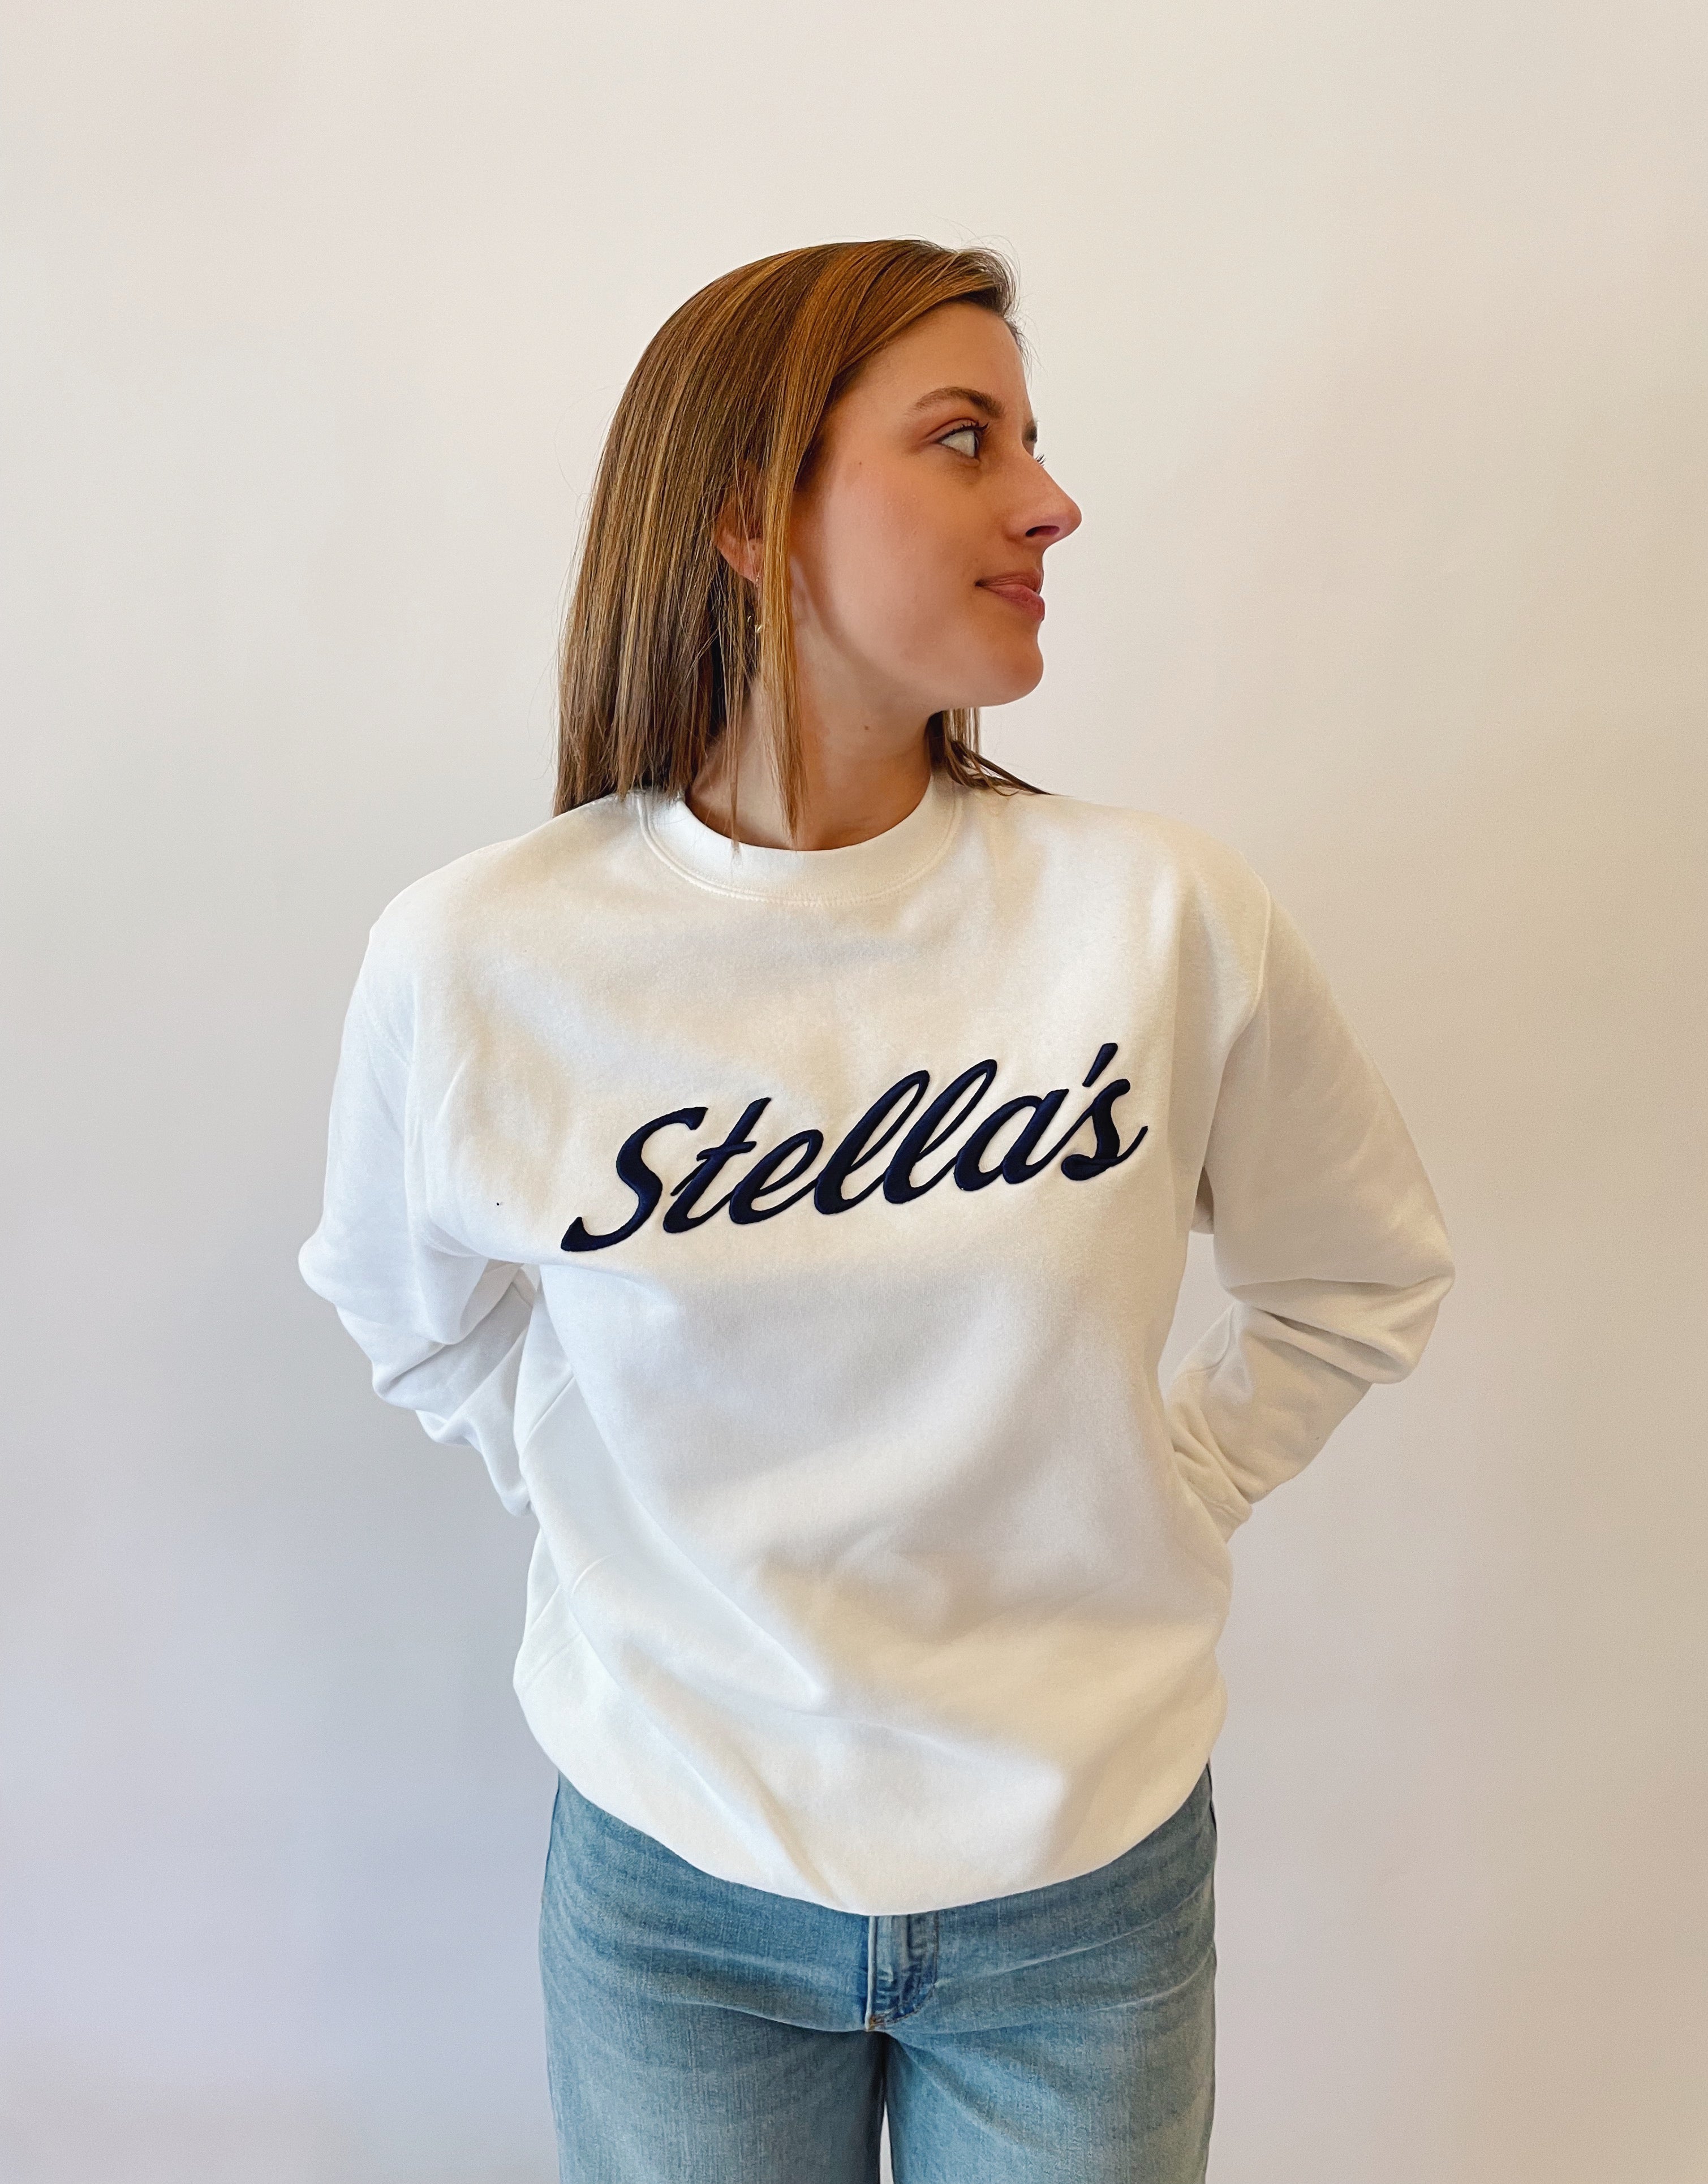 Stella's Embroidered Crewneck Sweatshirt White with Navy Embroidery